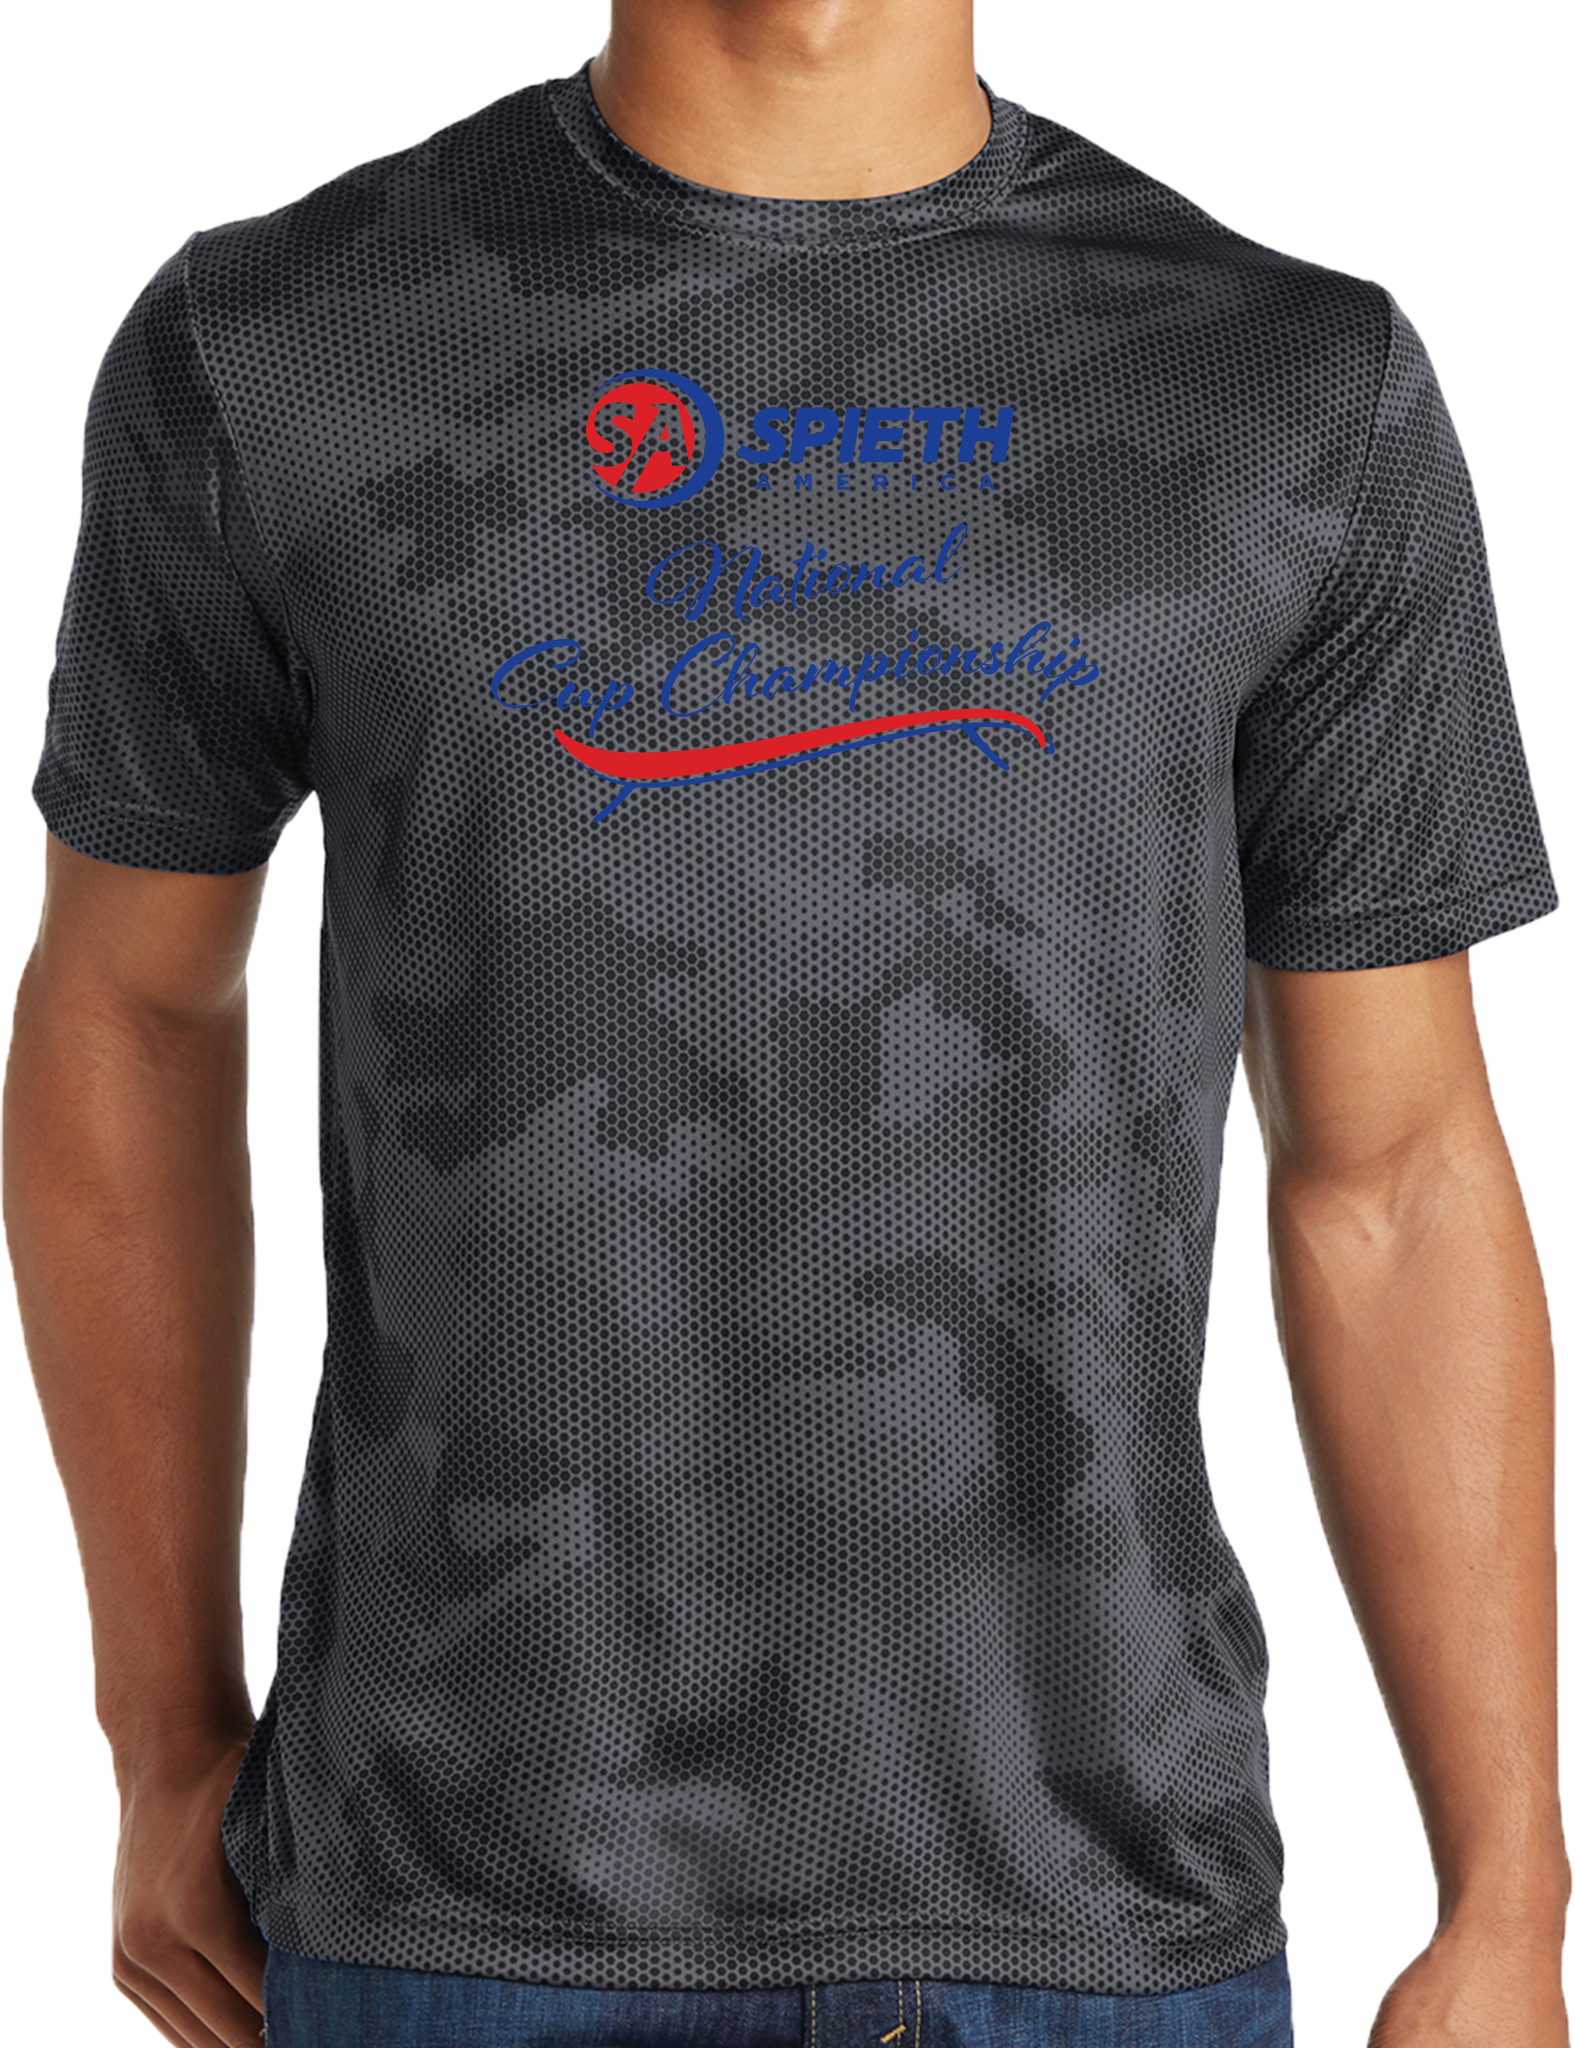 PERFORMANCE SHIRTS - 2023 SPIETH AMERICA CUP